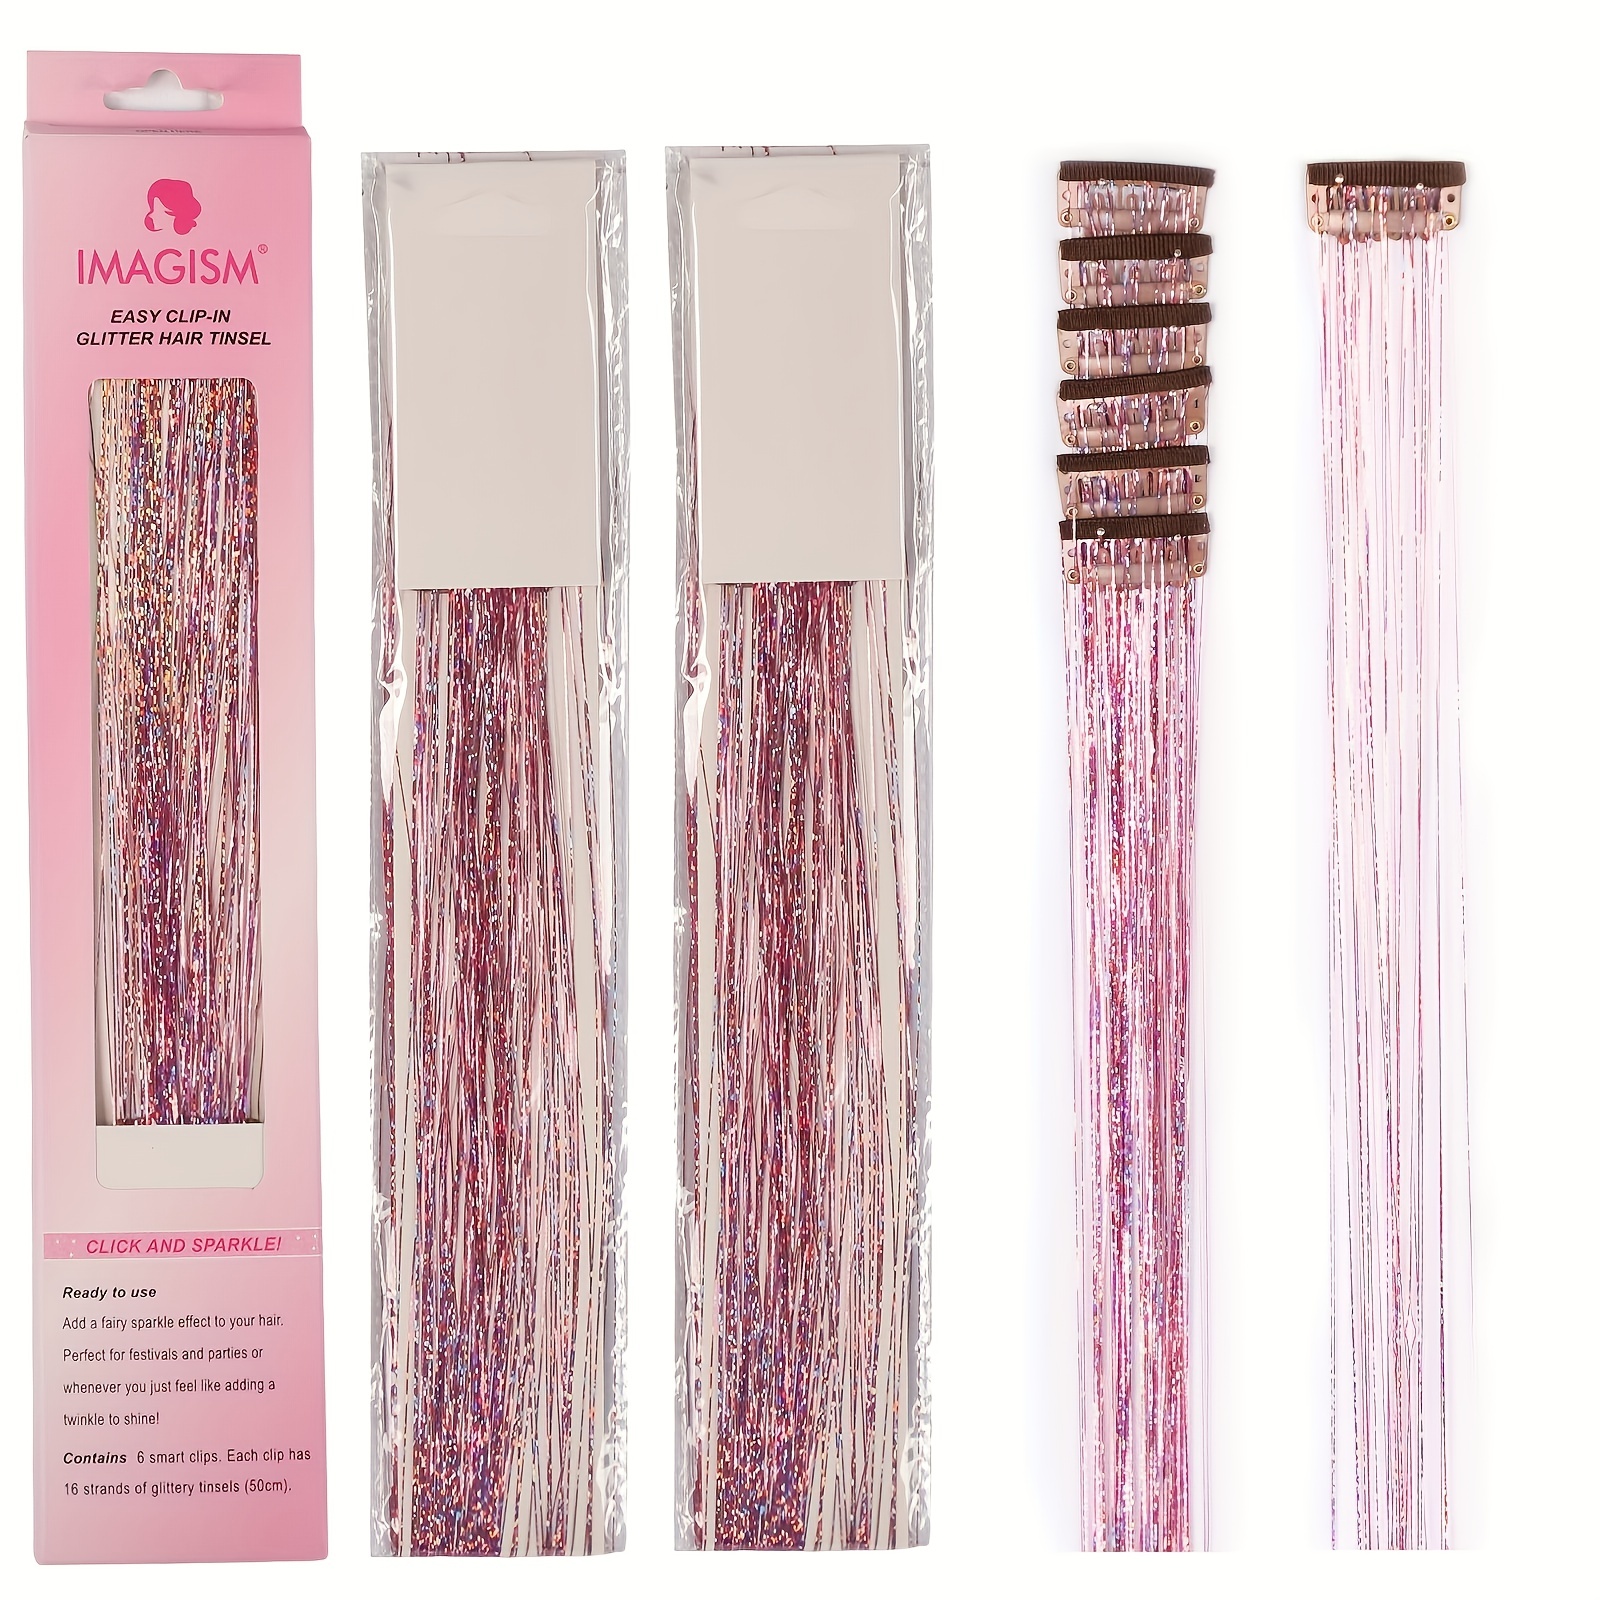 Clip in Hair Tinsel Heat Resistant 19.6 Inch Fairy Hair Extension Tinsel  Kit Glitter Hair Tensile Clip in on Sparkling Shiny Colorful Hair  Accessories